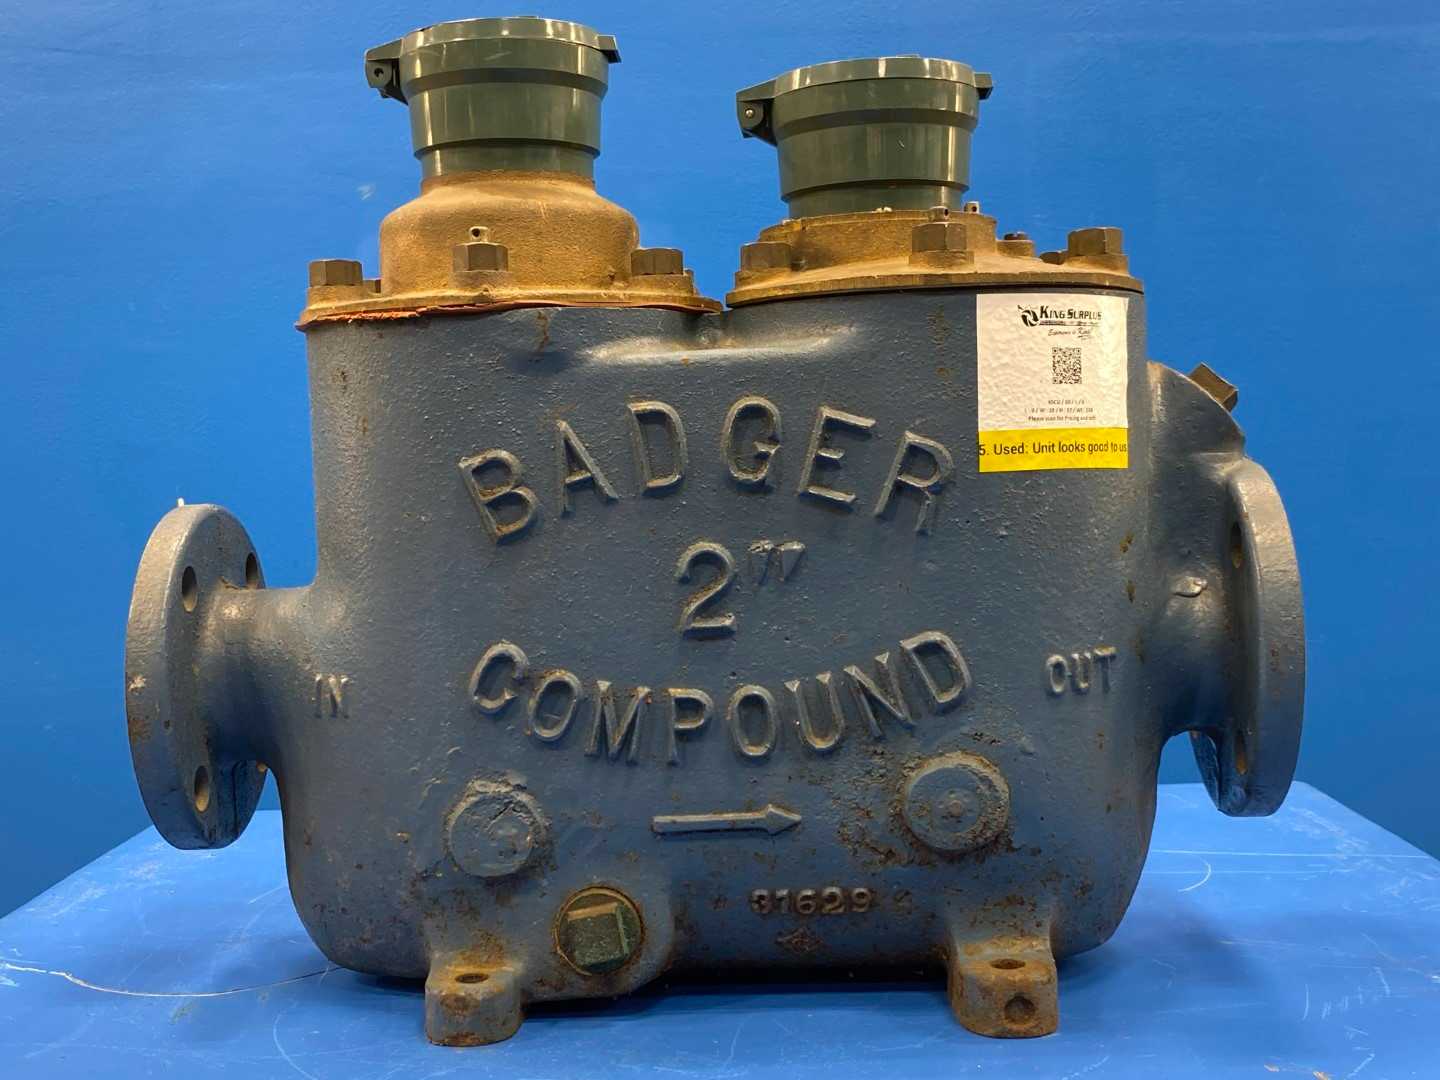 Badger Mechanical Flow Meter Recordall Compound Series 2" 